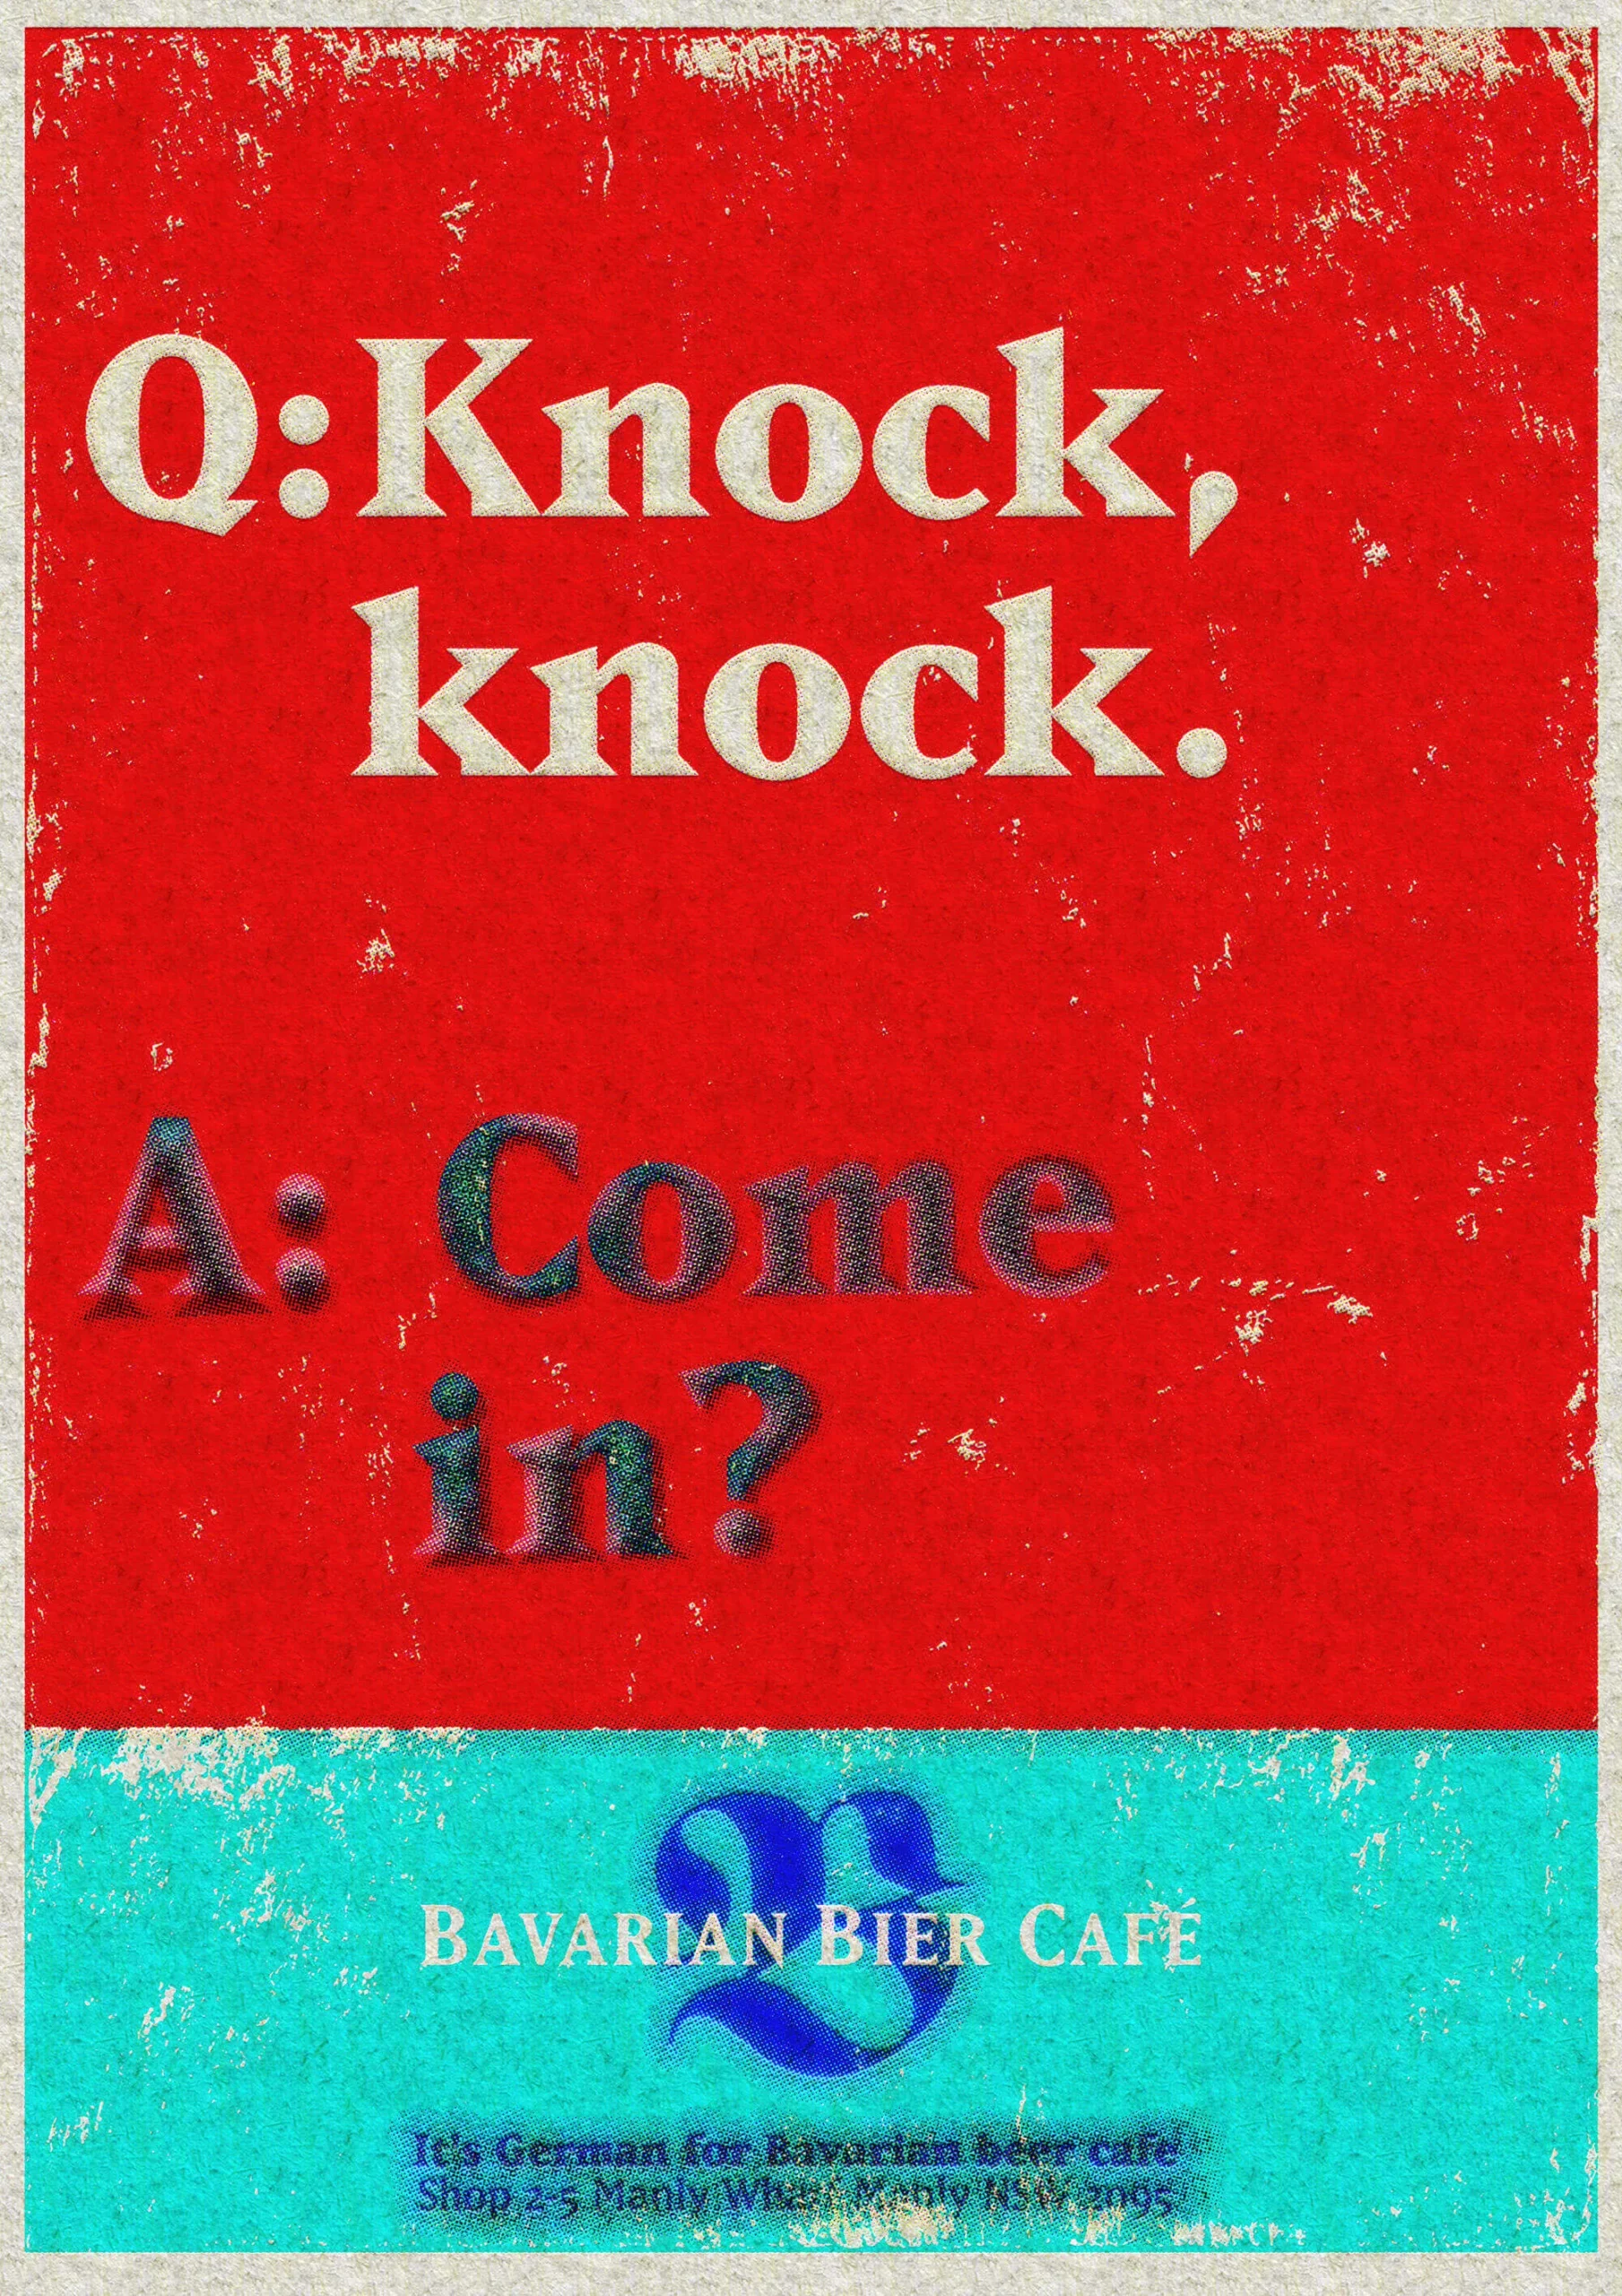 An advert for a Bavarian Bier Café that says "Q: Knock, knock. A: Come in."